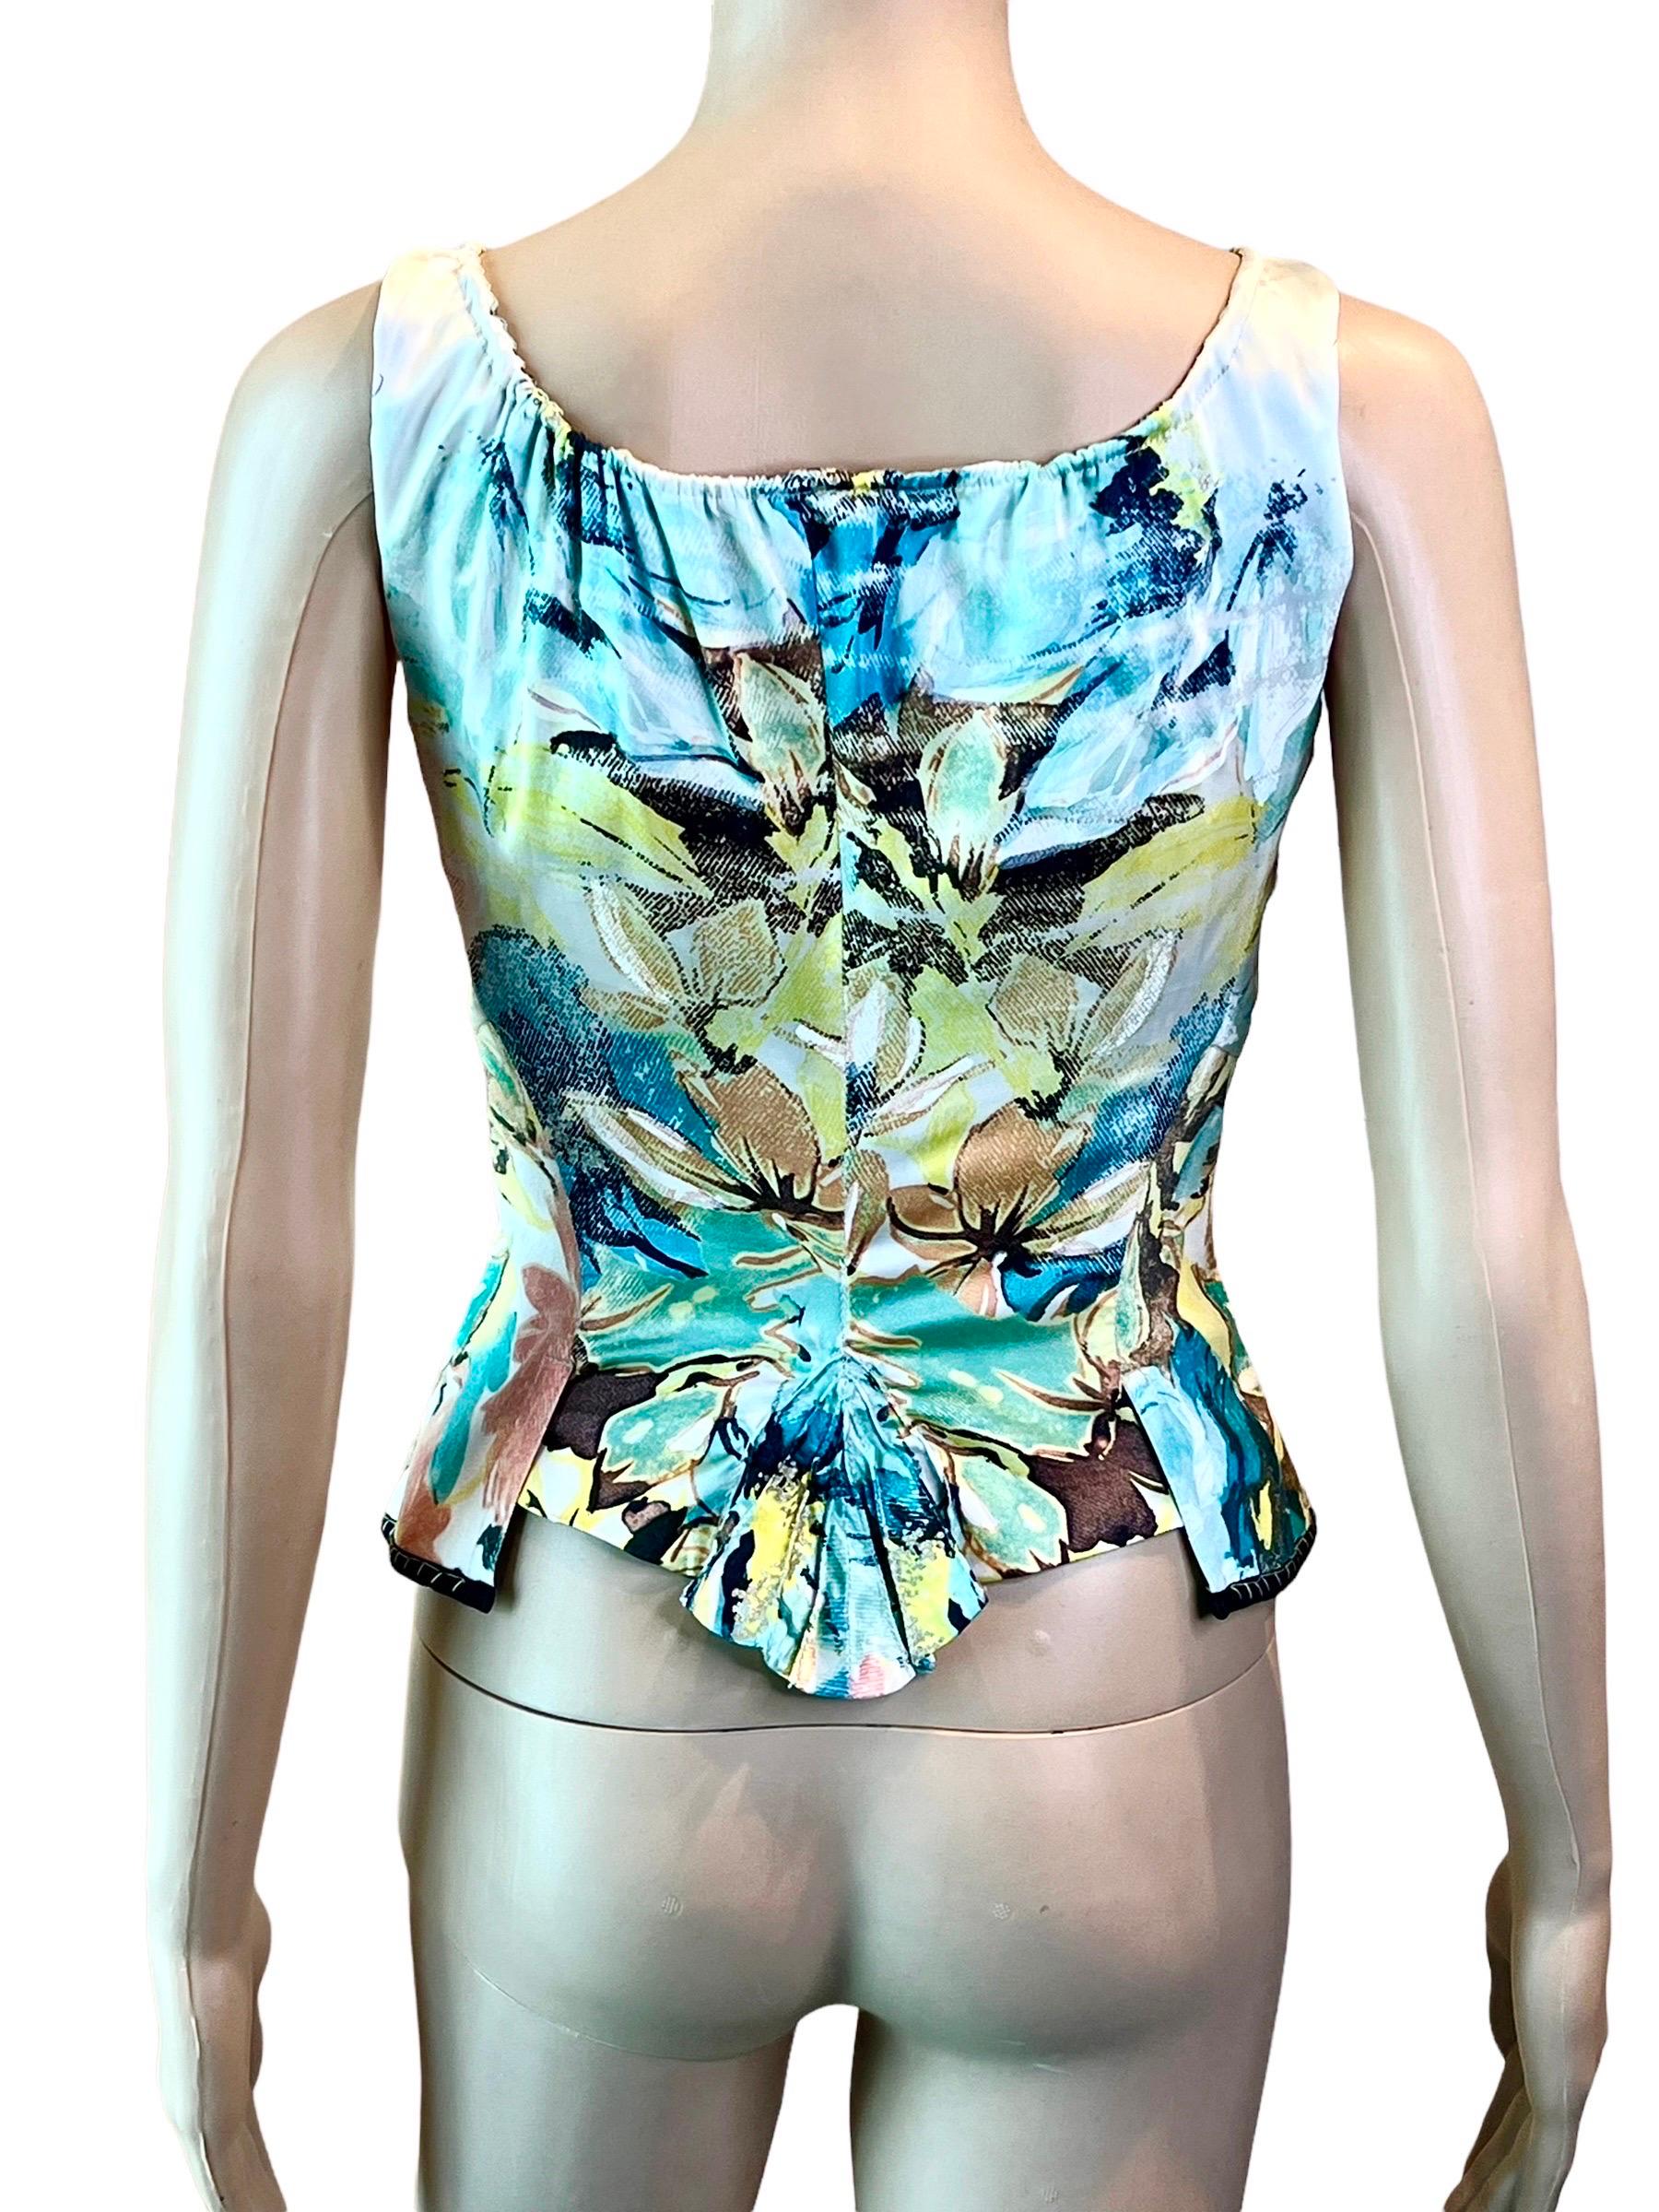 Roberto Cavalli S/S 2003 Bustier Corset Floral Abstract Print Denim Silk Top For Sale 1